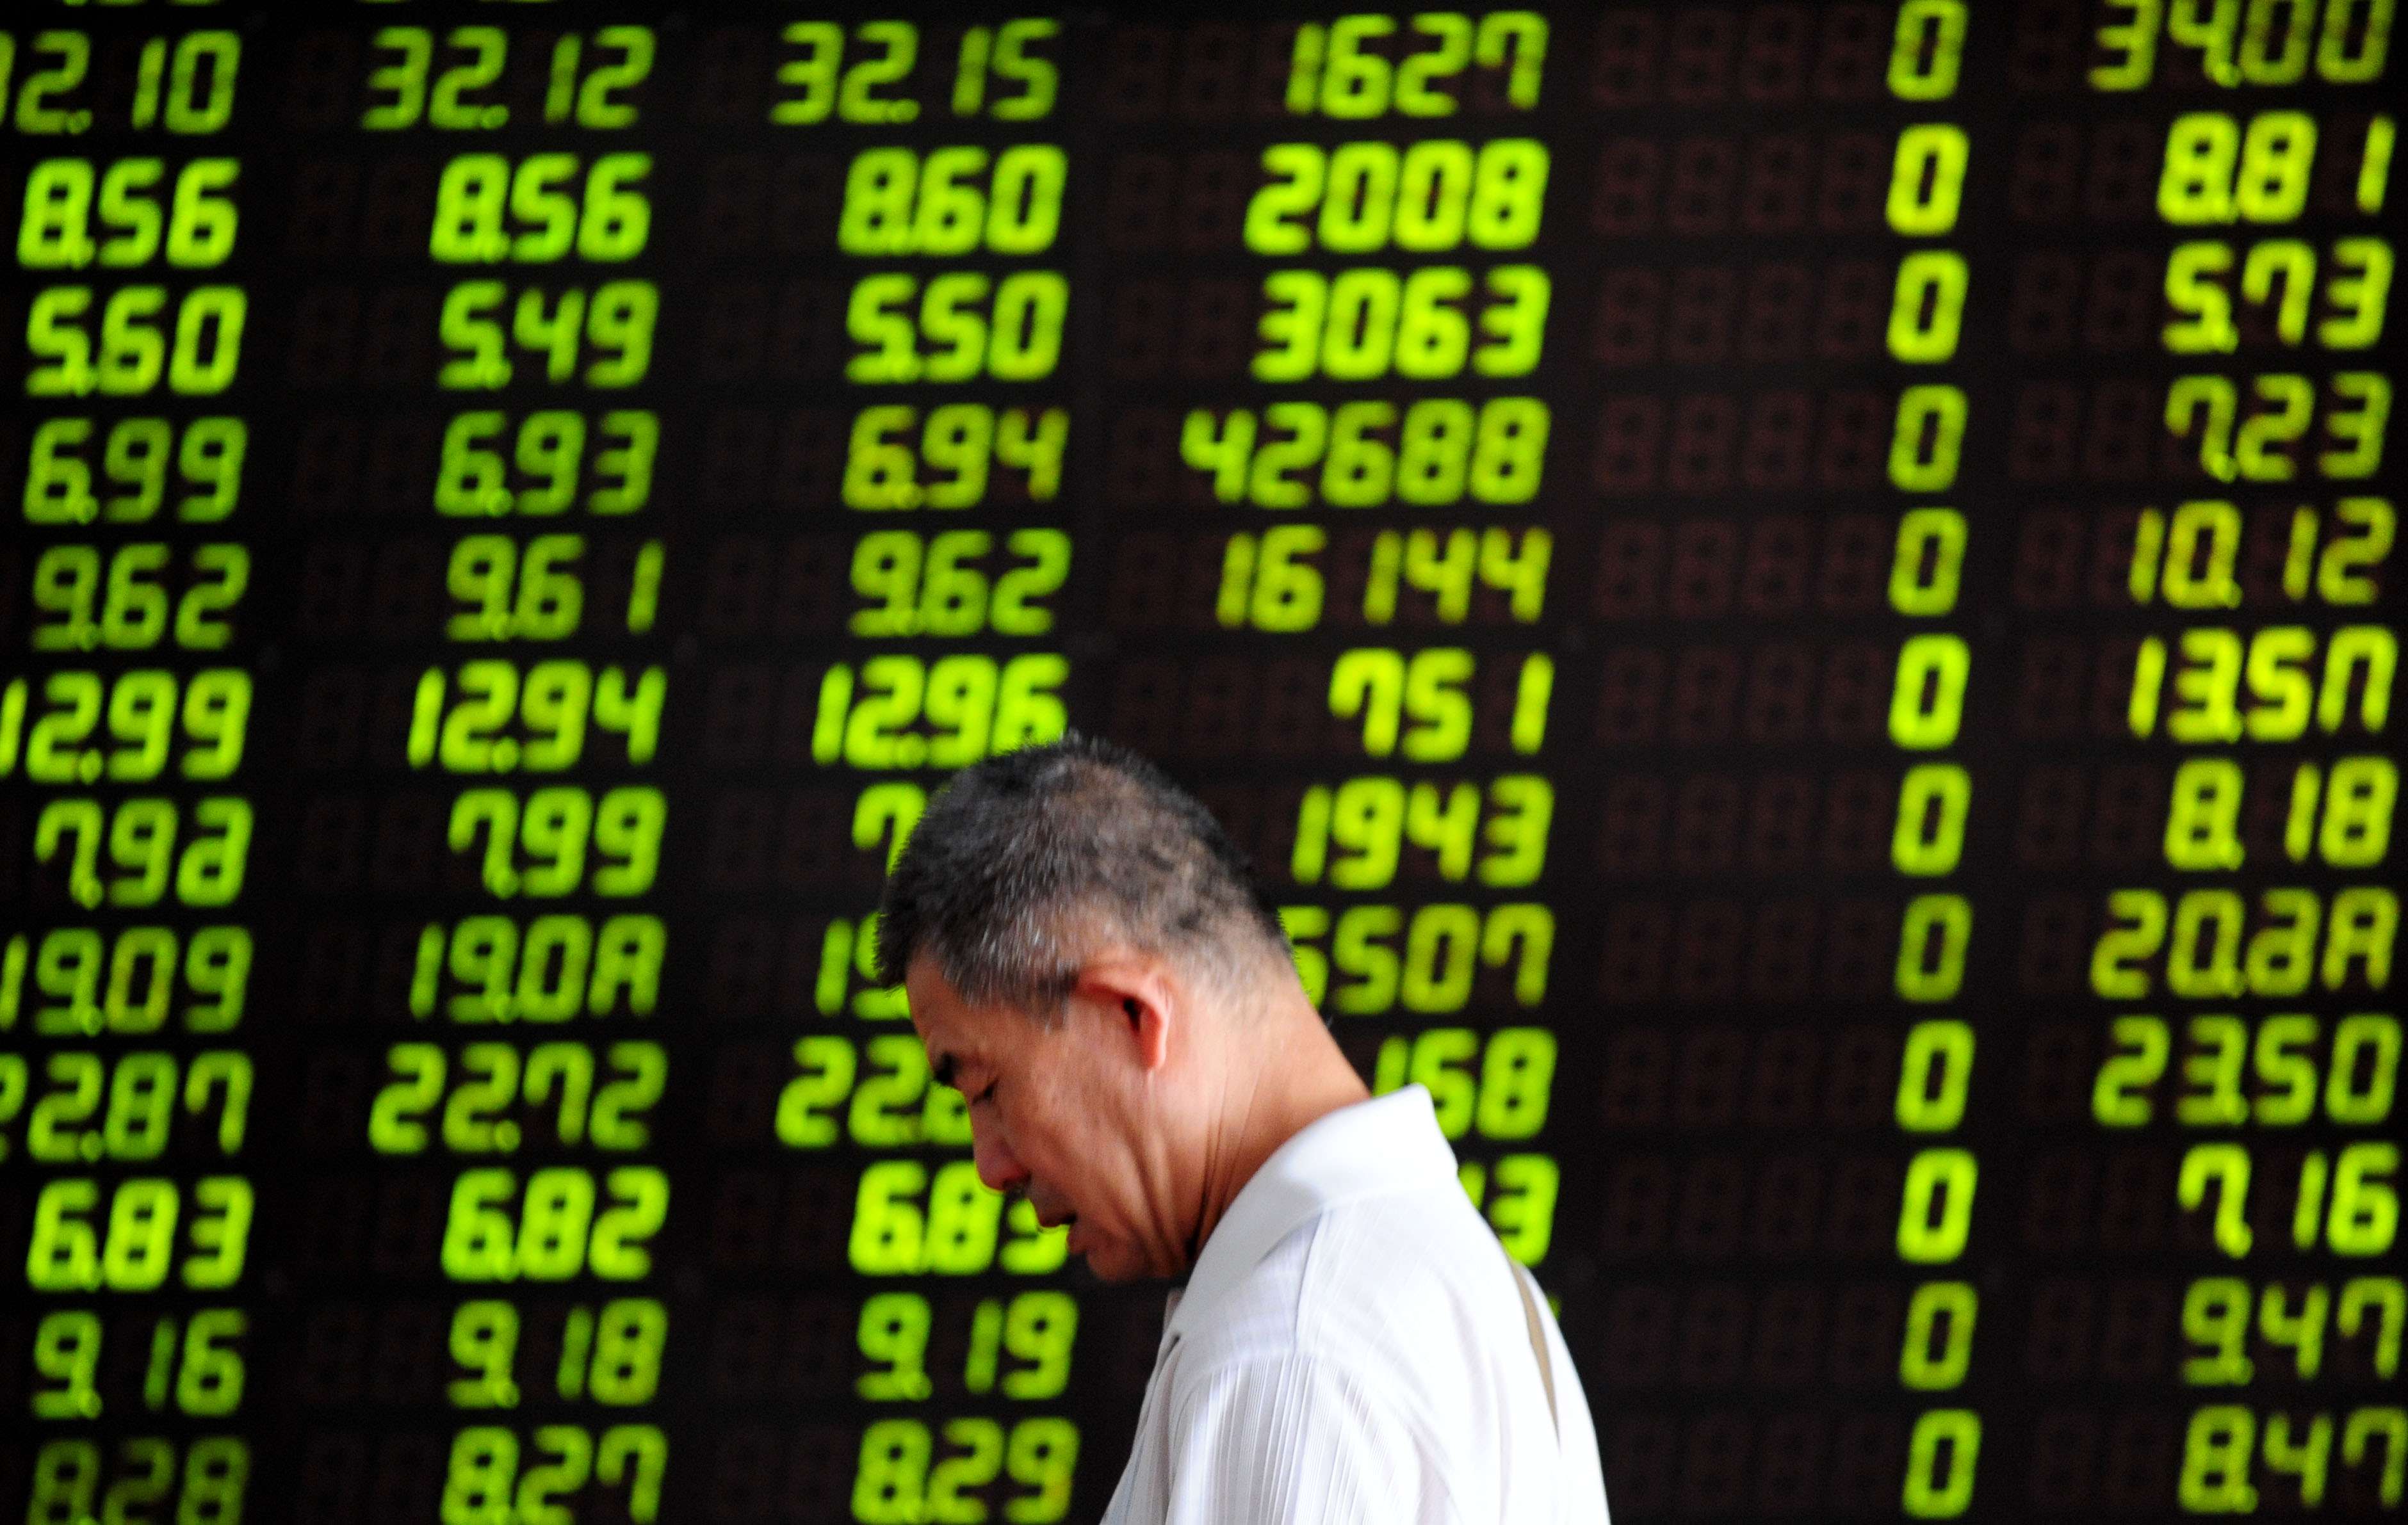 An investor walks past a stock screen in Shenyang on July 30, 2015 when the Shanghai Composite Index fell 2.2 per cent. Contrary to global norms, China’s stock market displays gains in red, losses in green. Photo: Xinhua.